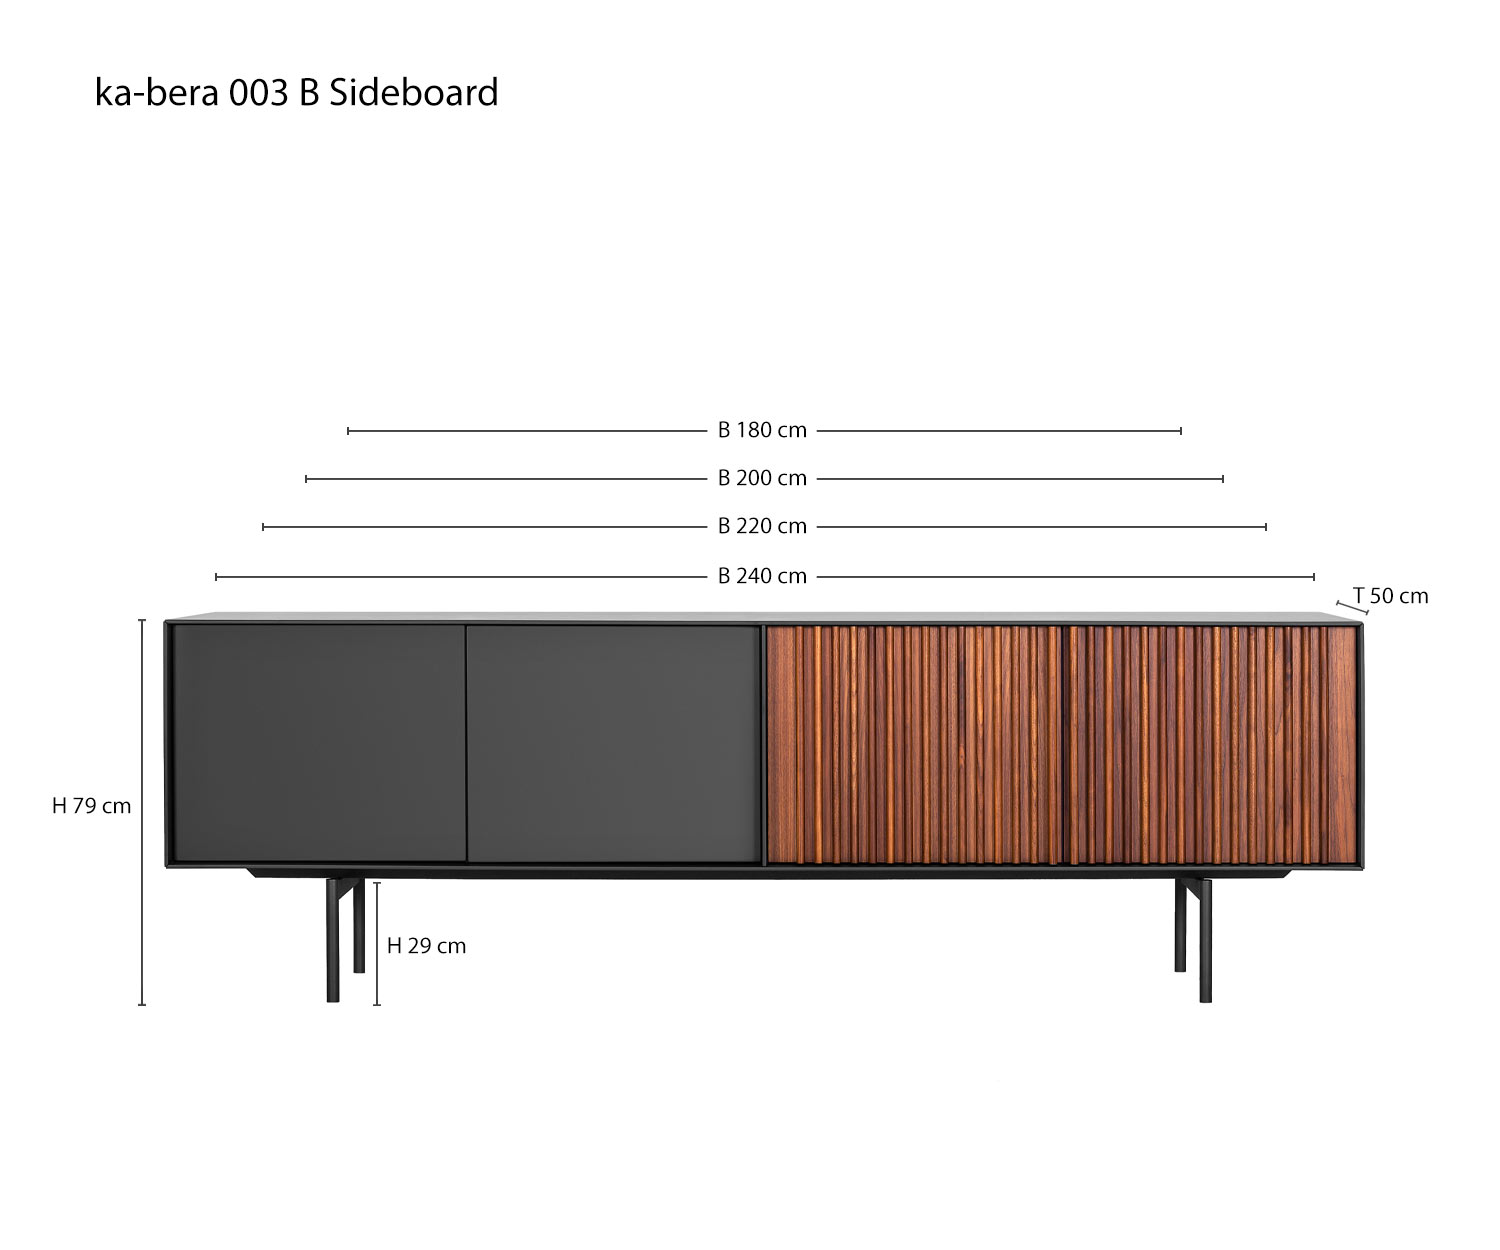 Designer sideboard ka bera 003 B from al2 Sketch Dimensions Sizes Size specifications 